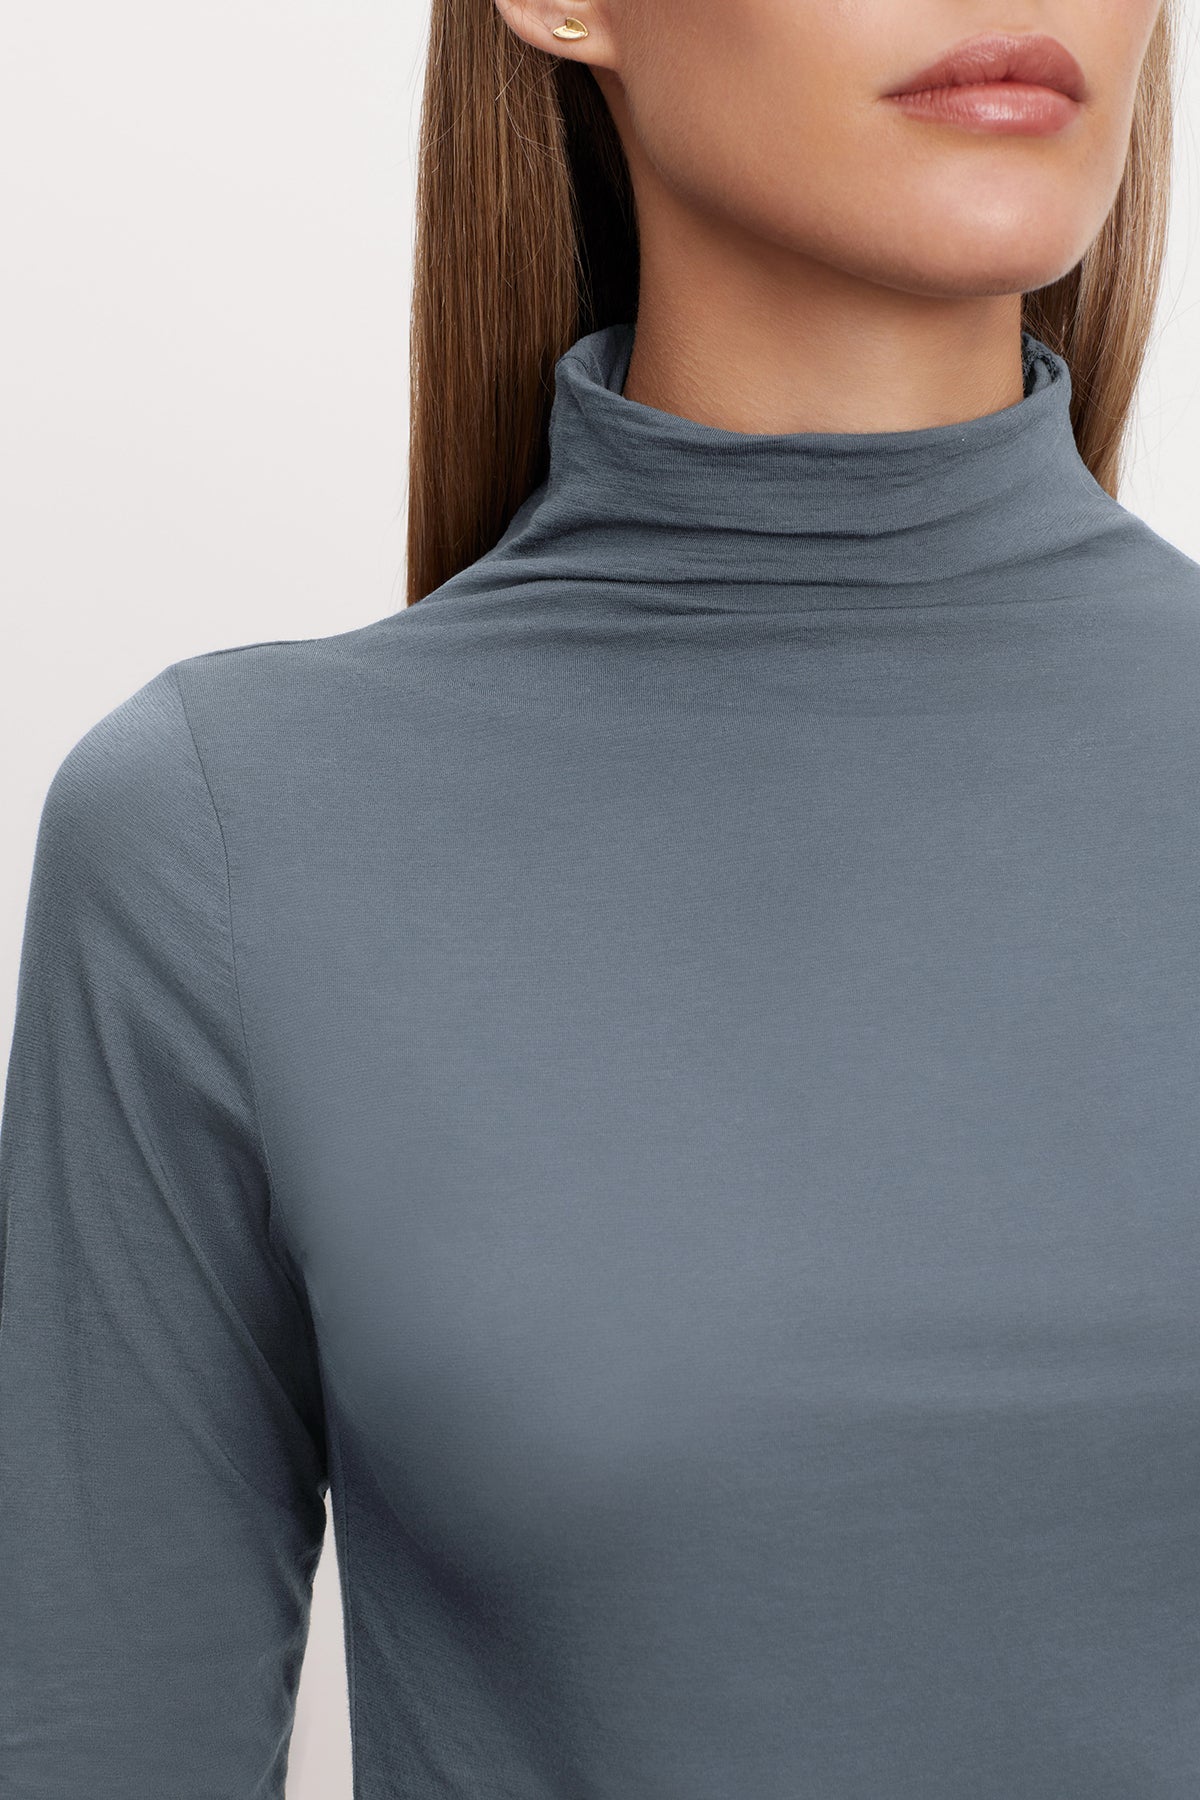   A woman wearing a grey TALISIA GAUZY WHISPER FITTED MOCK NECK TEE, a versatile wardrobe staple in the fashion world by Velvet by Graham & Spencer. 